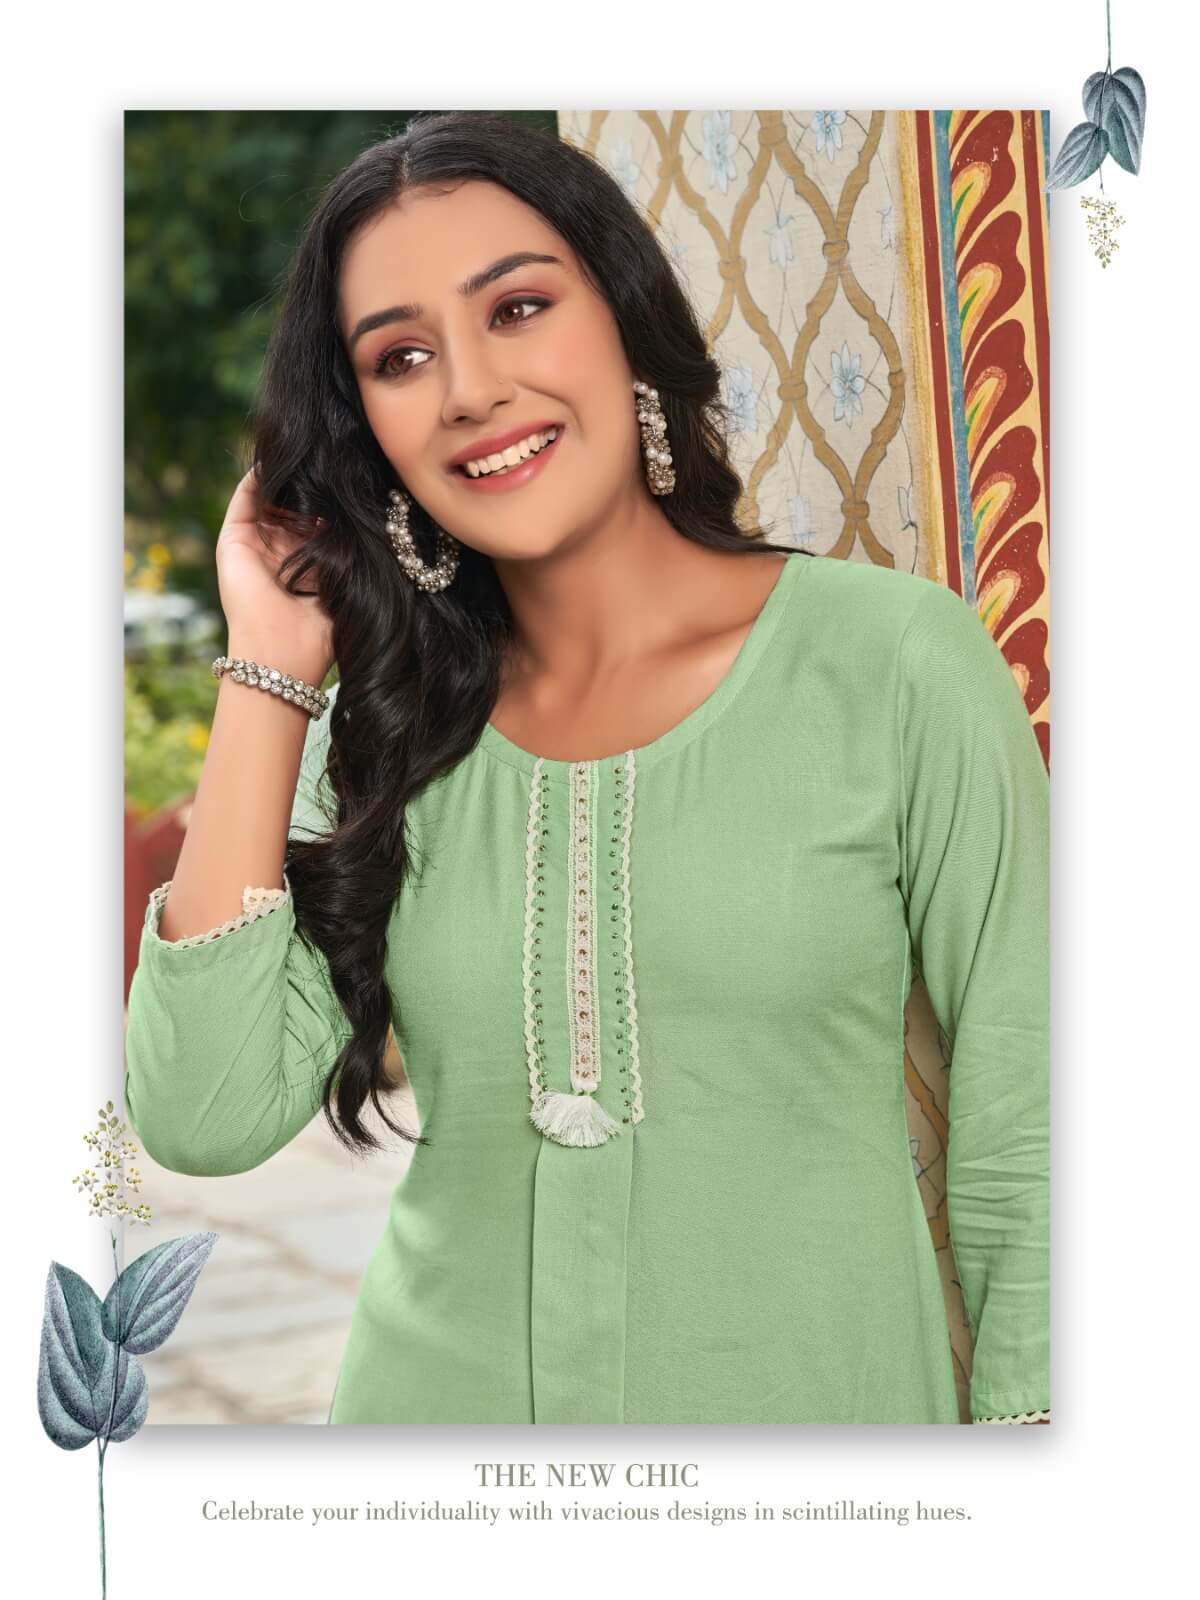 Heritage Cherry Rayon Ladies Tops Catalog collection 6